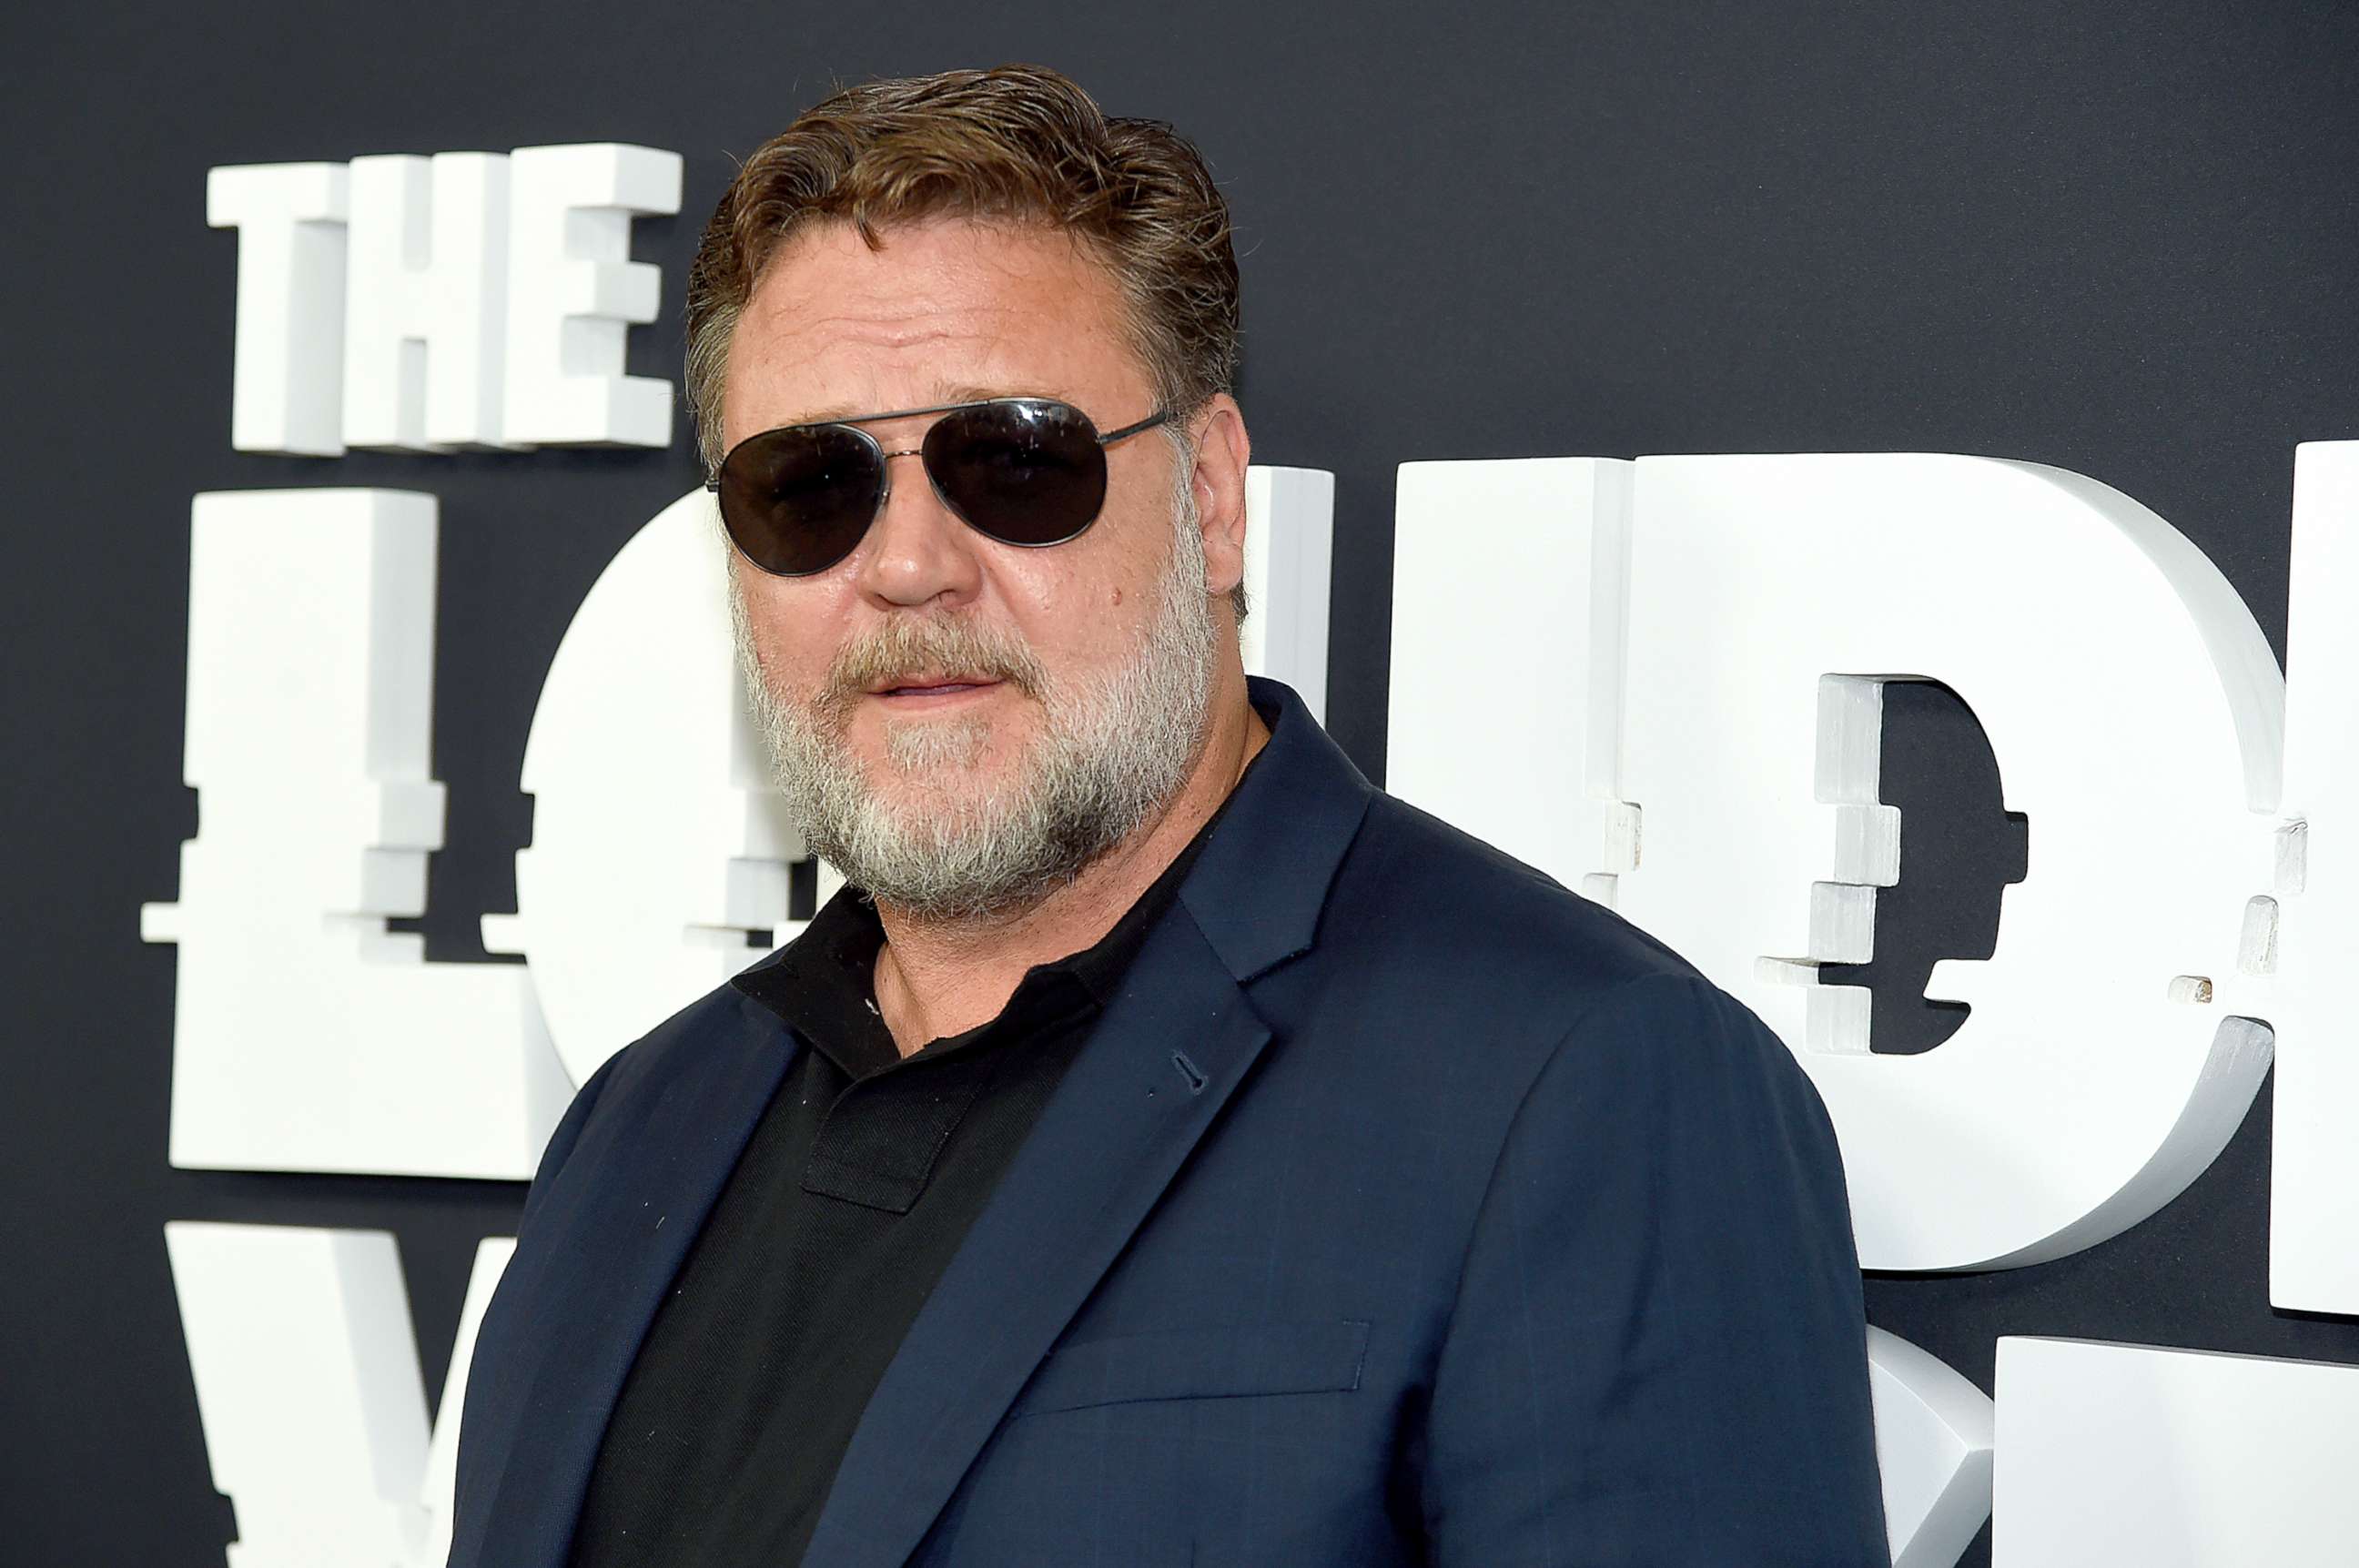 PHOTO: Russell Crowe attends "The Loudest Voice" New York Premiere at Paris Theatre on June 24, 2019, in New York.